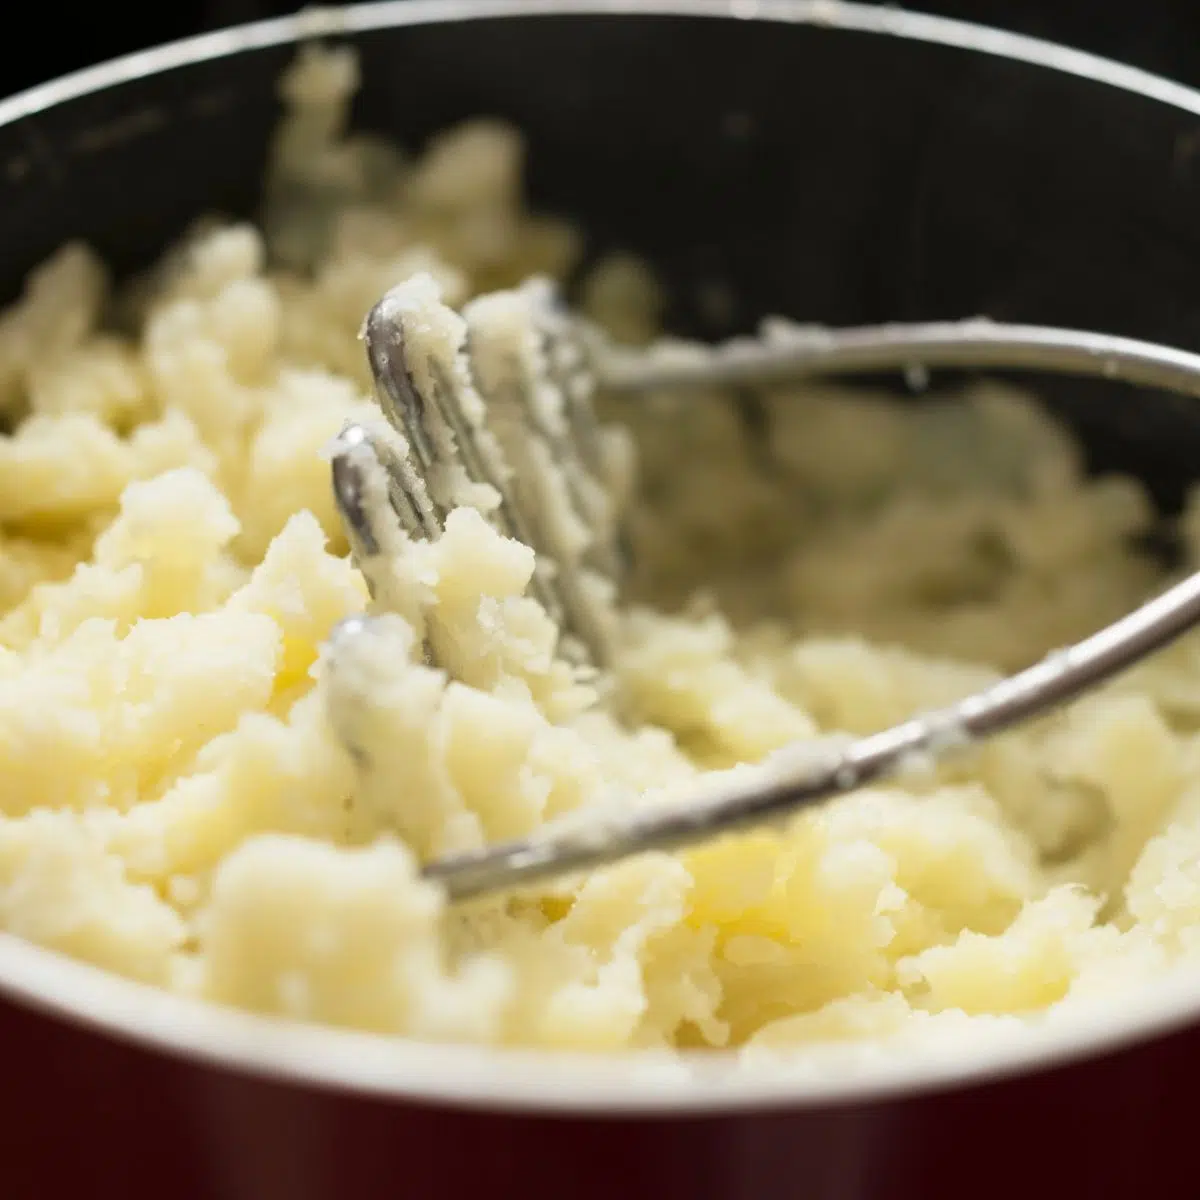 Square image of mashed potatoes in a pot.